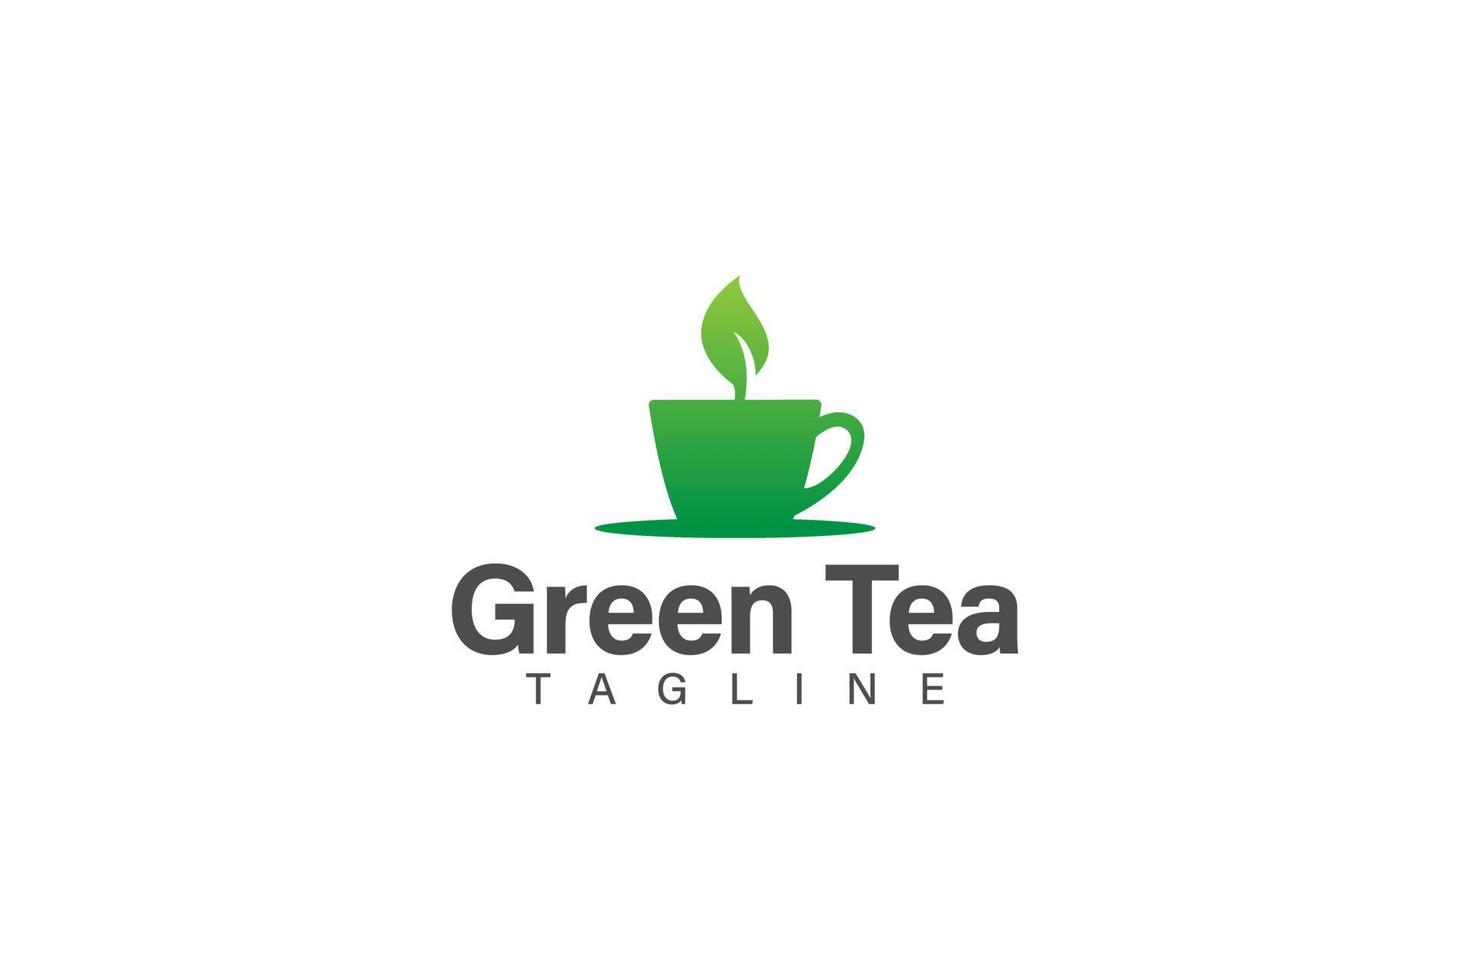 Green tea or green coffee logo design vector with cup and leaf concept, logo for healthy drink